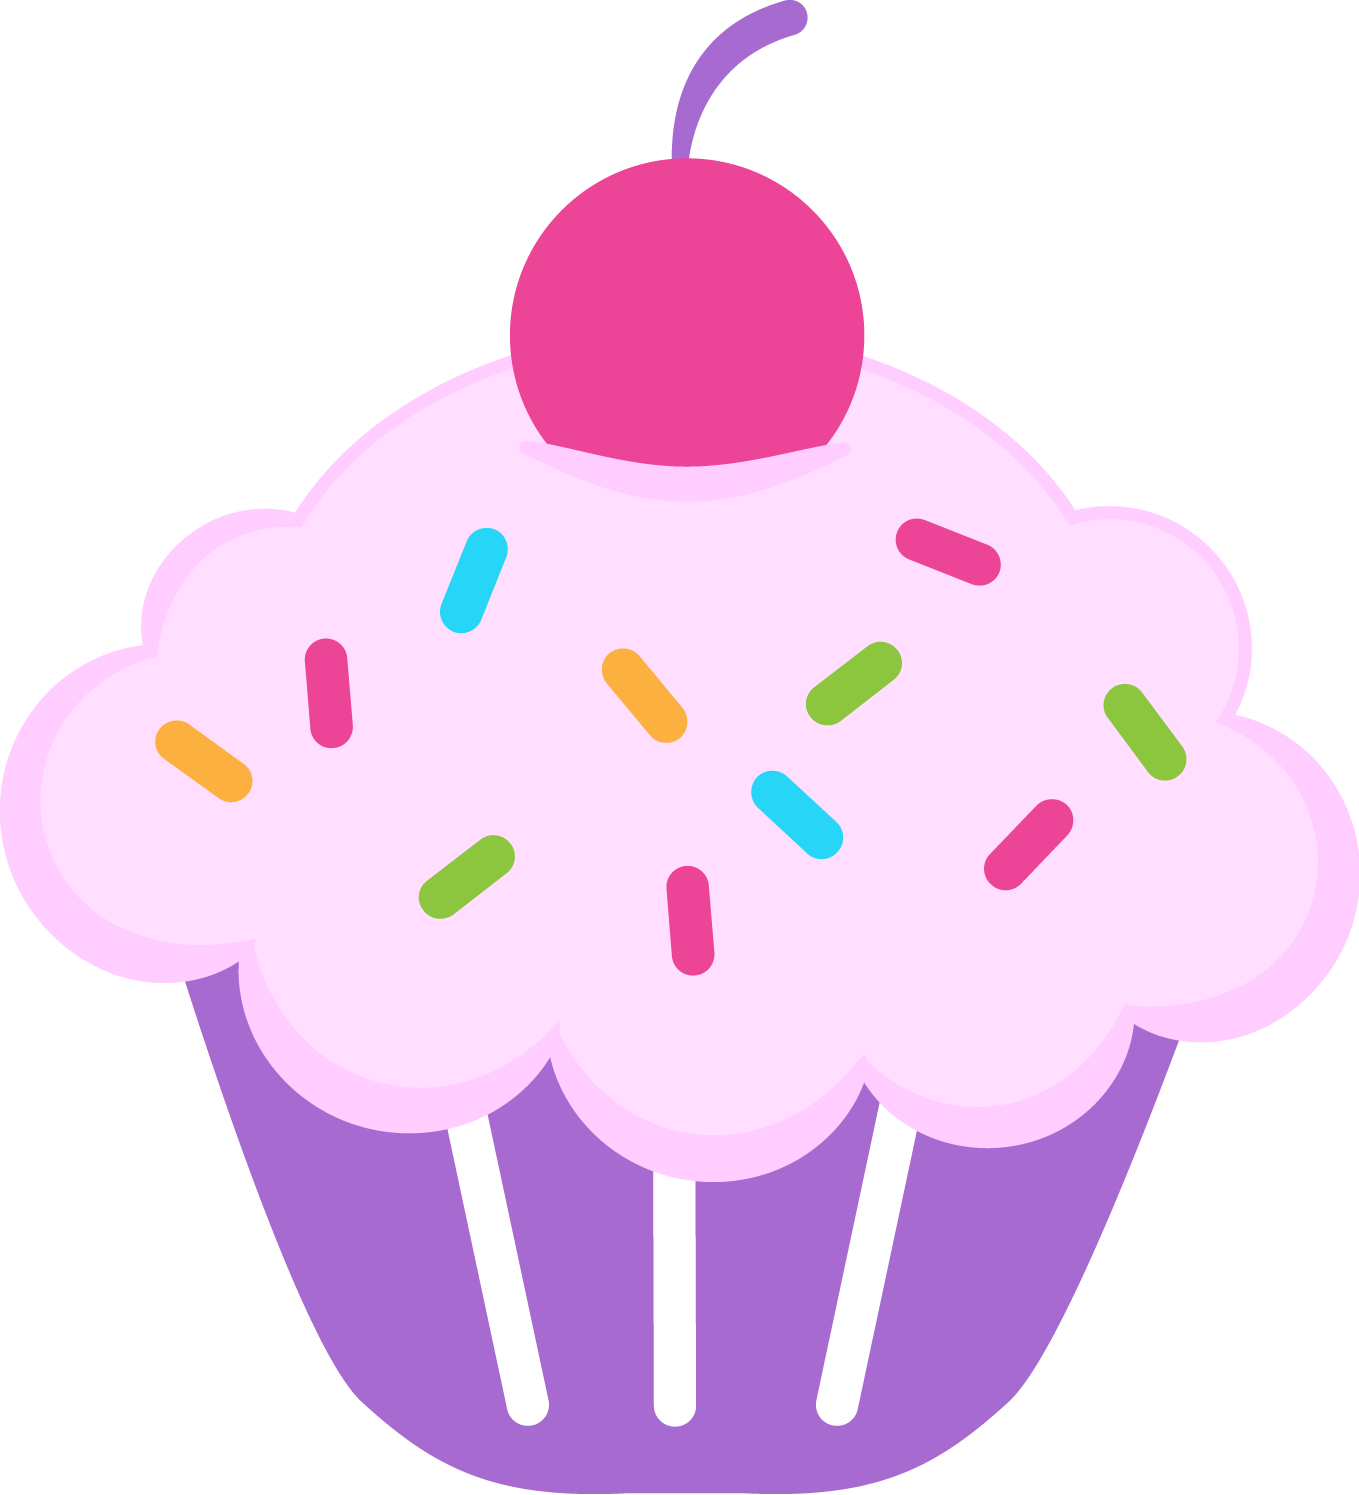 cupcake clipart free download - photo #43